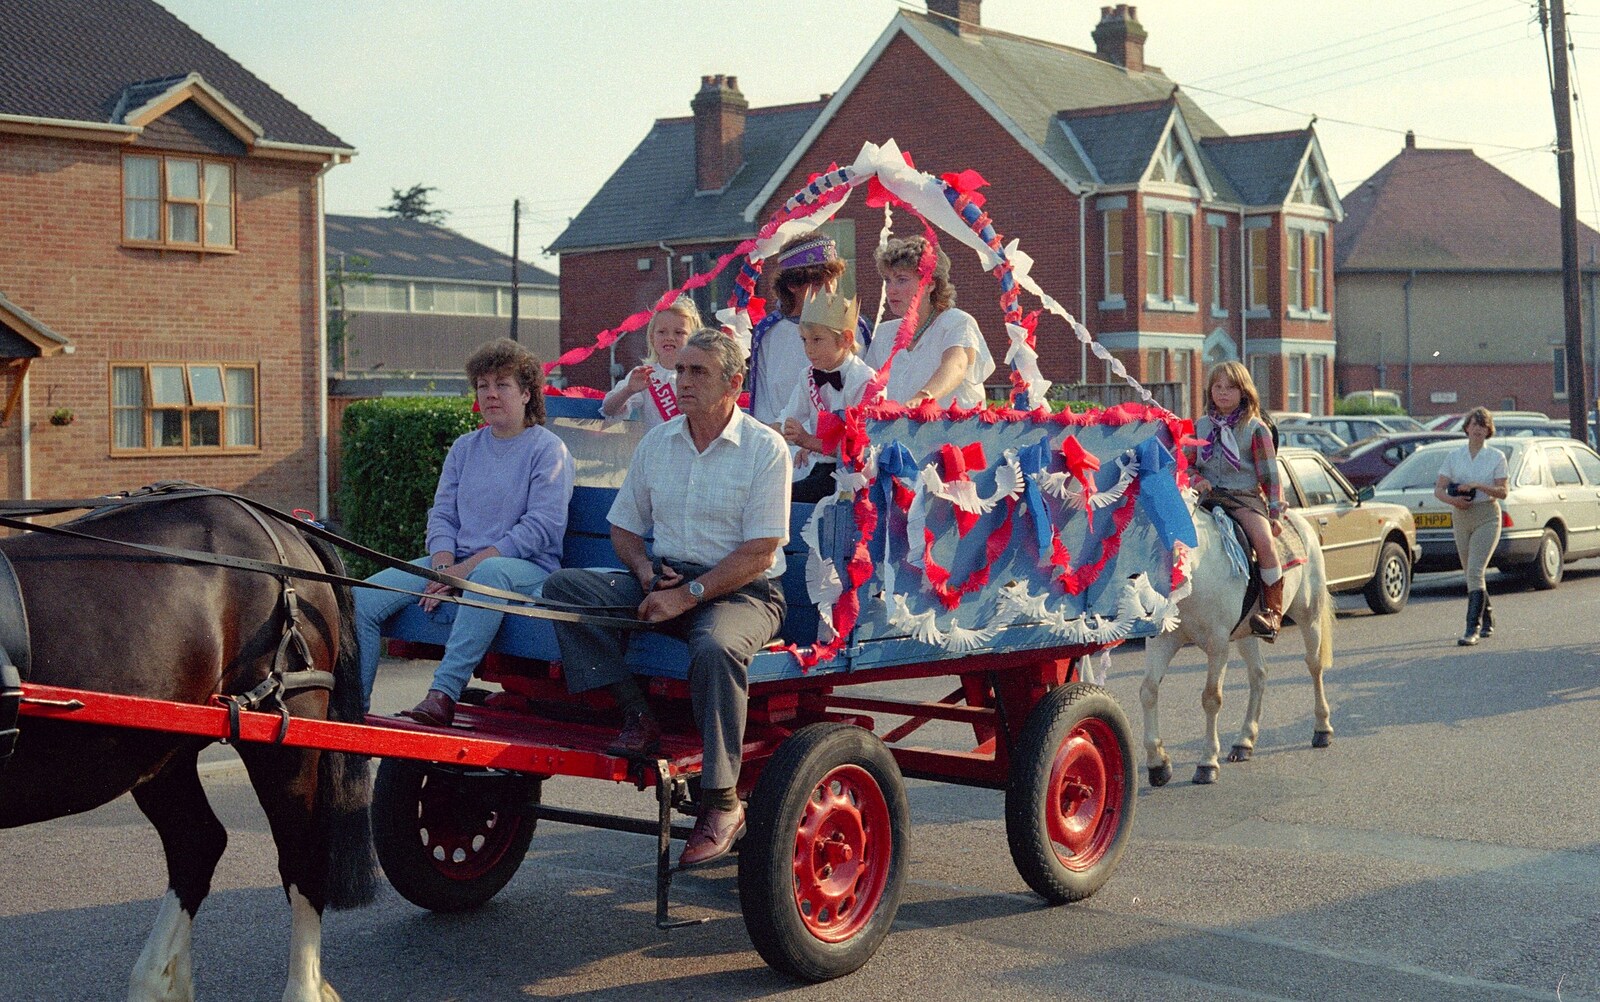 Horse and cart, with the carnival queen from Sean and the New Milton Carnival, Hampshire - 1st August 1986